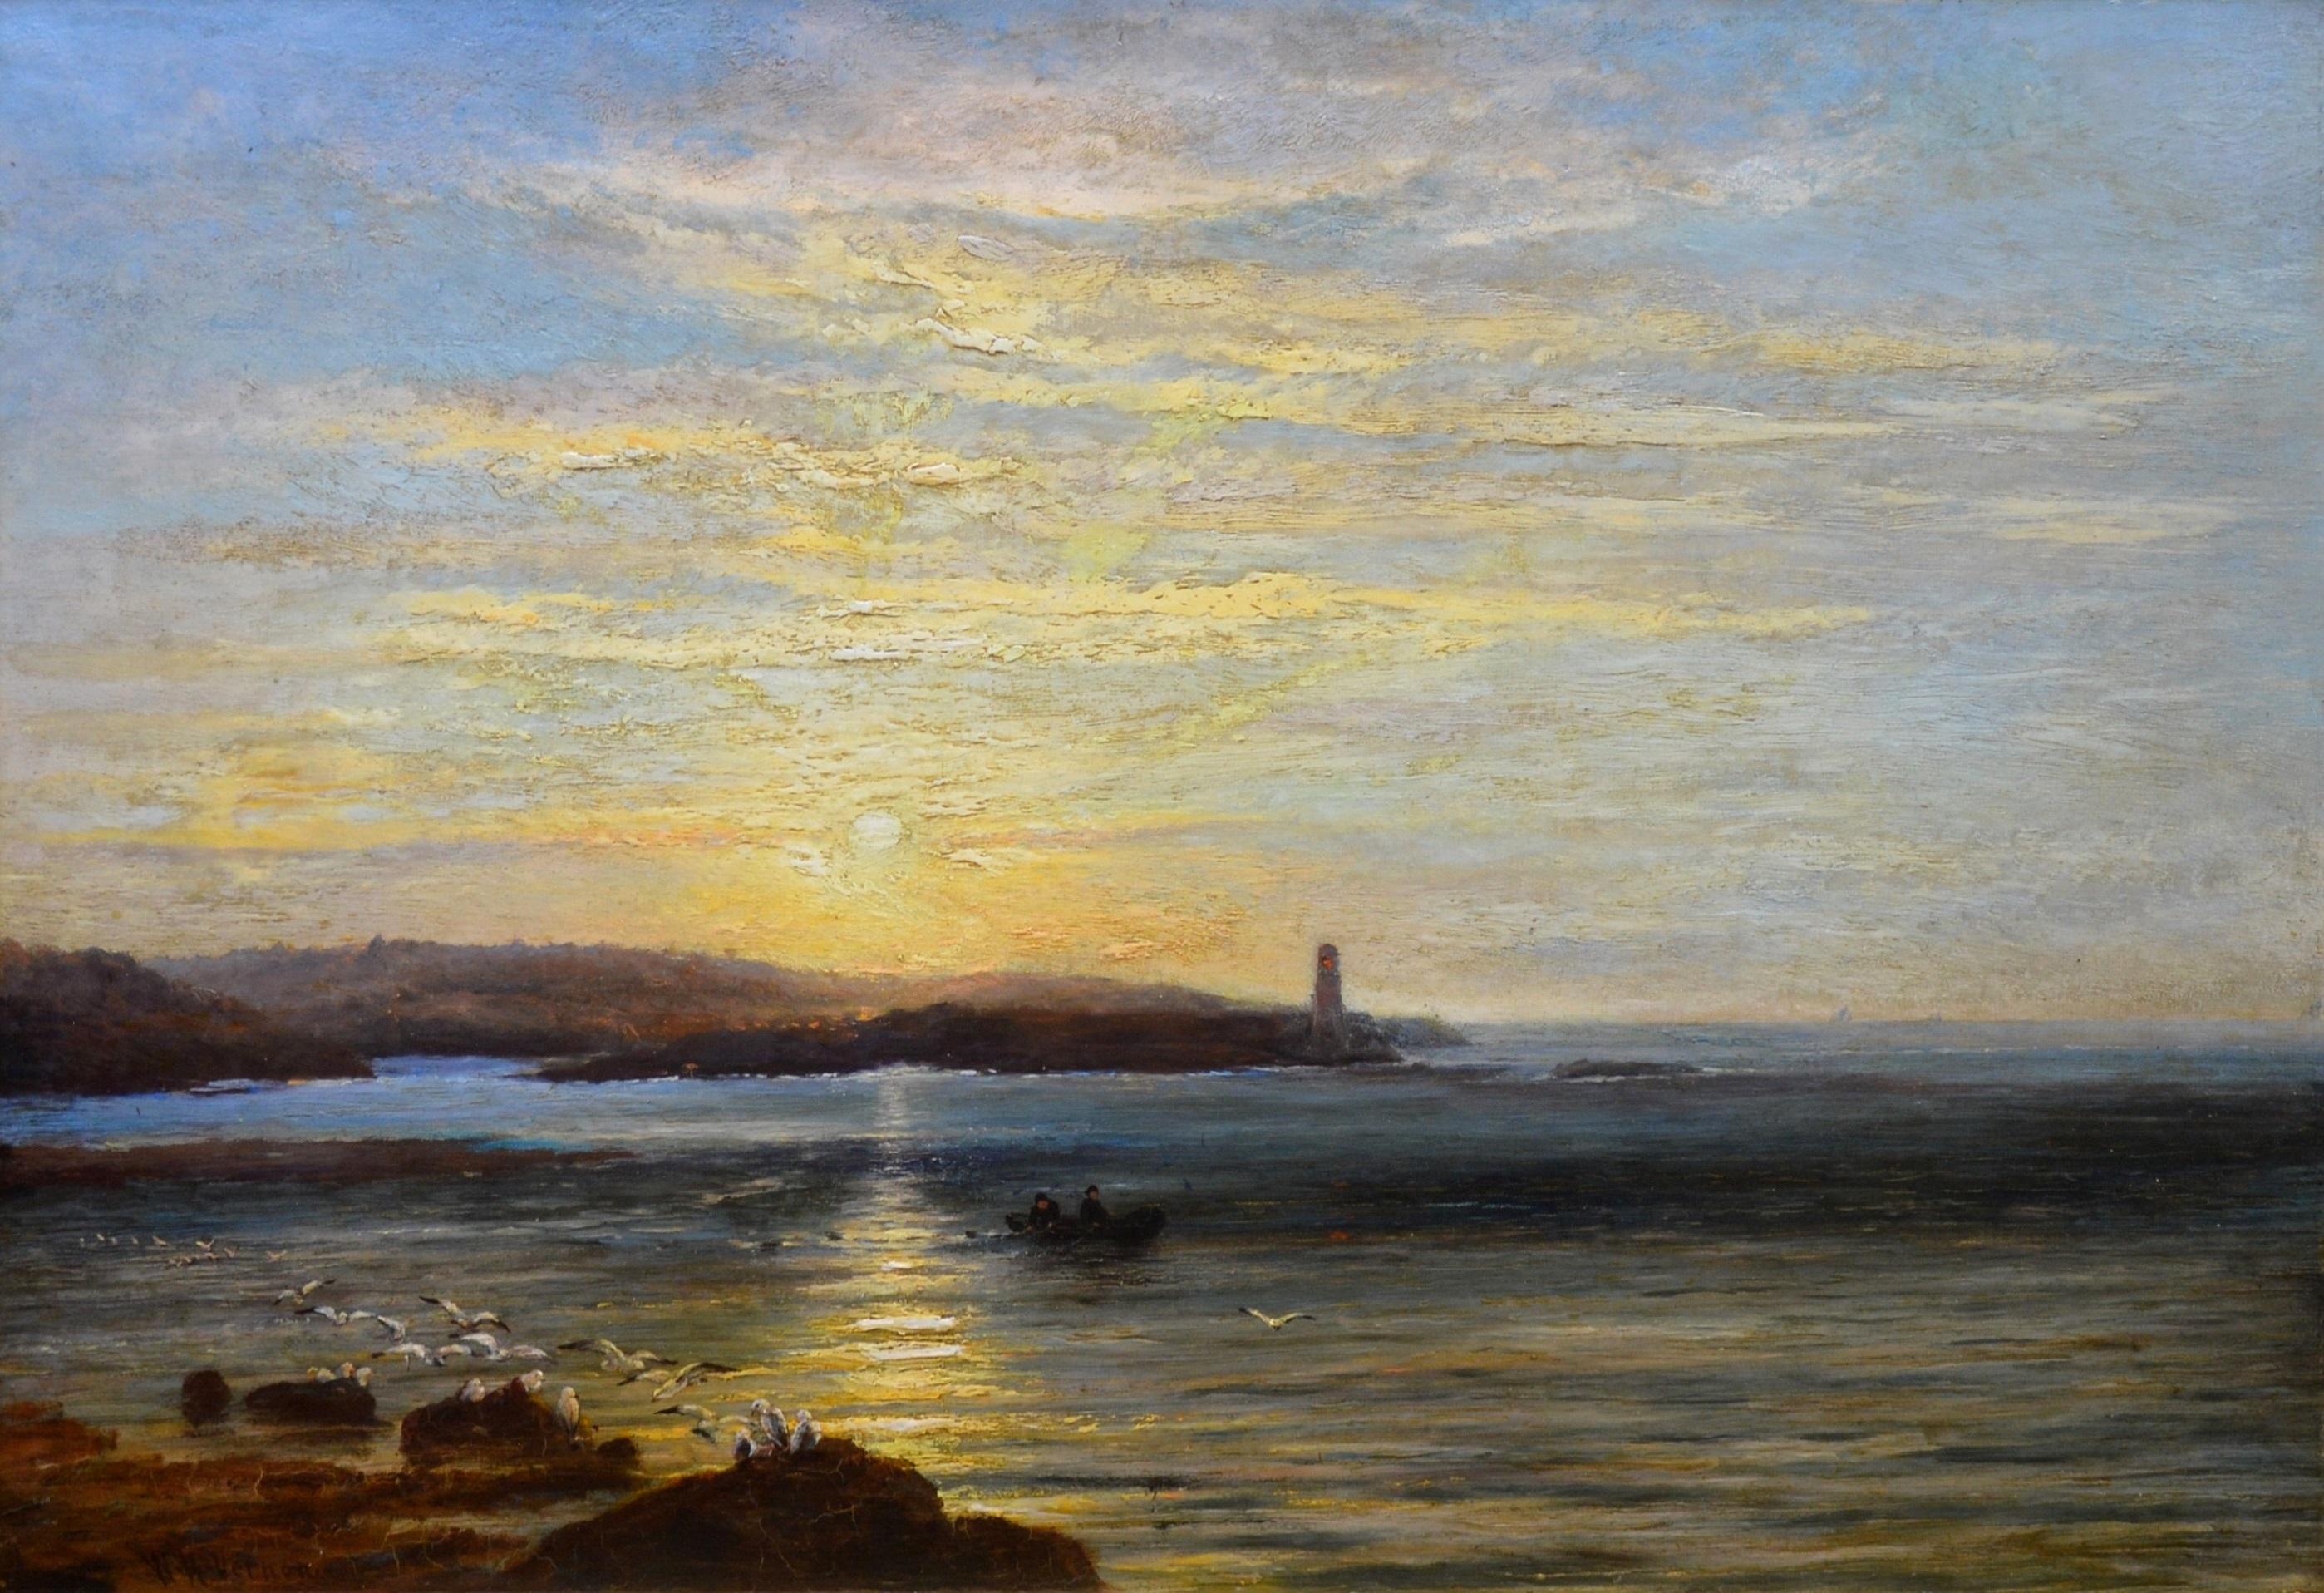 This is a large fine 19th century oil on canvas depicting a spectacular sunset over Caernarfon Bay in North West Wales by the listed Victorian landscape painter William Henry Vernon (1820-1909). ‘Sunset, Caernarfon Bay’ is signed by the artist and